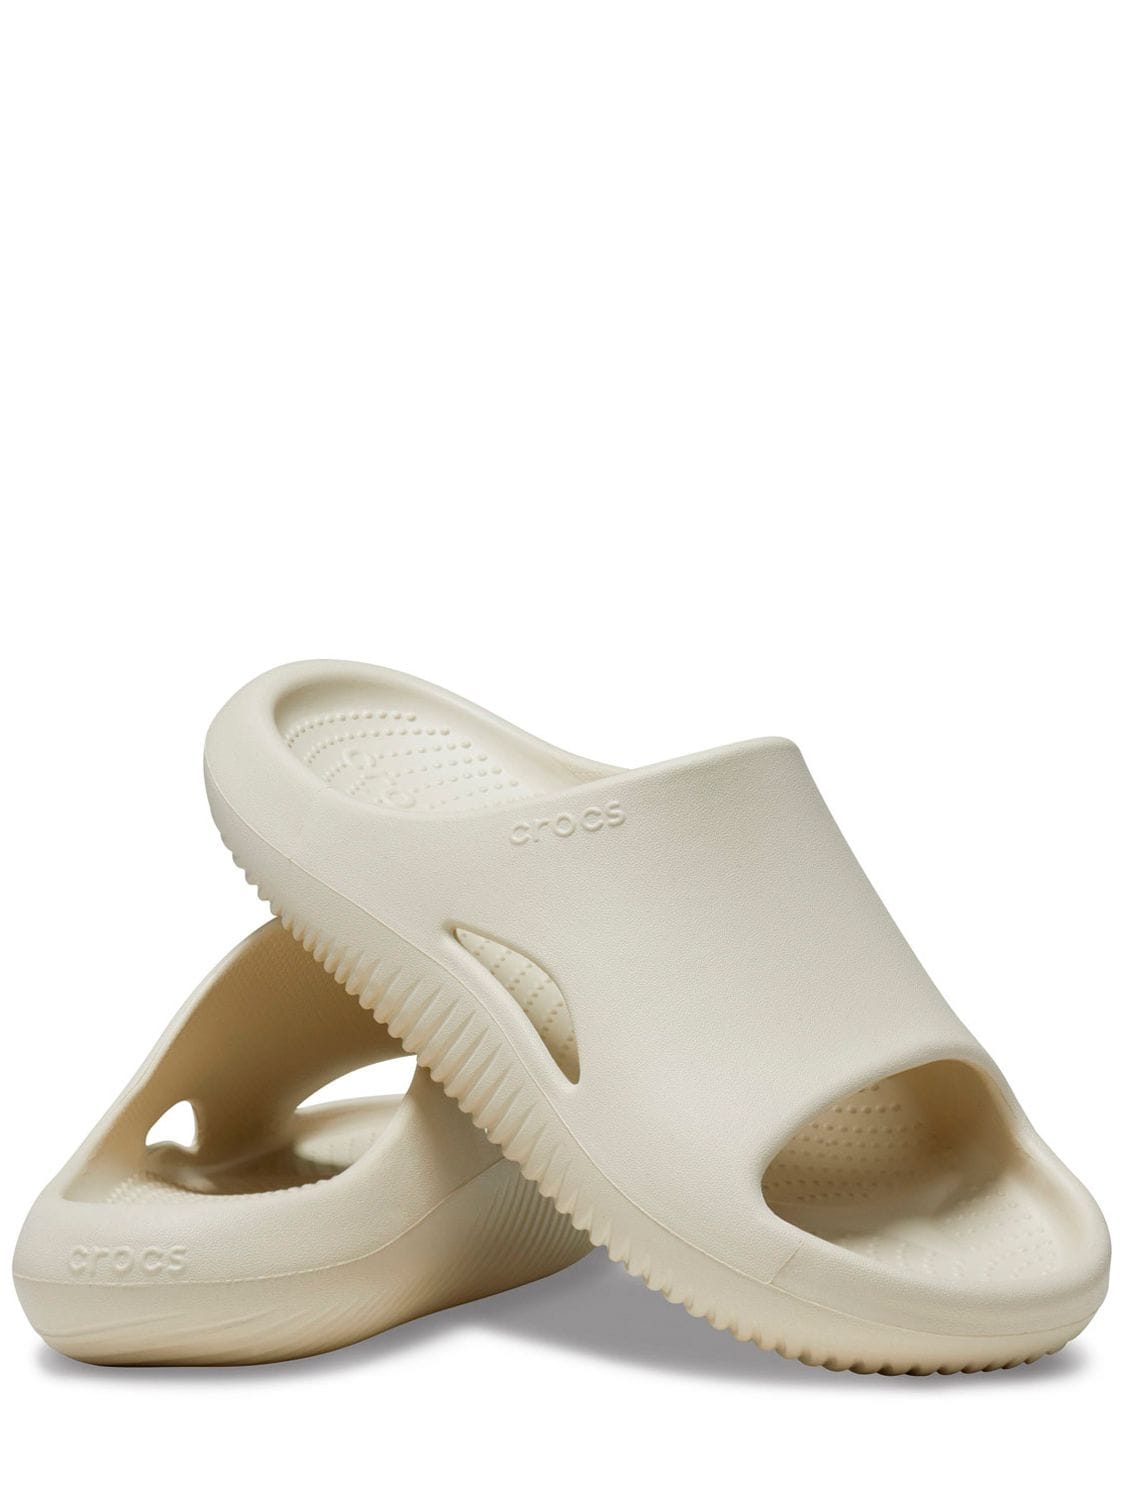 Crocs Men's Mellow Recovery Slide Sandals From Finish Line In Bone ...